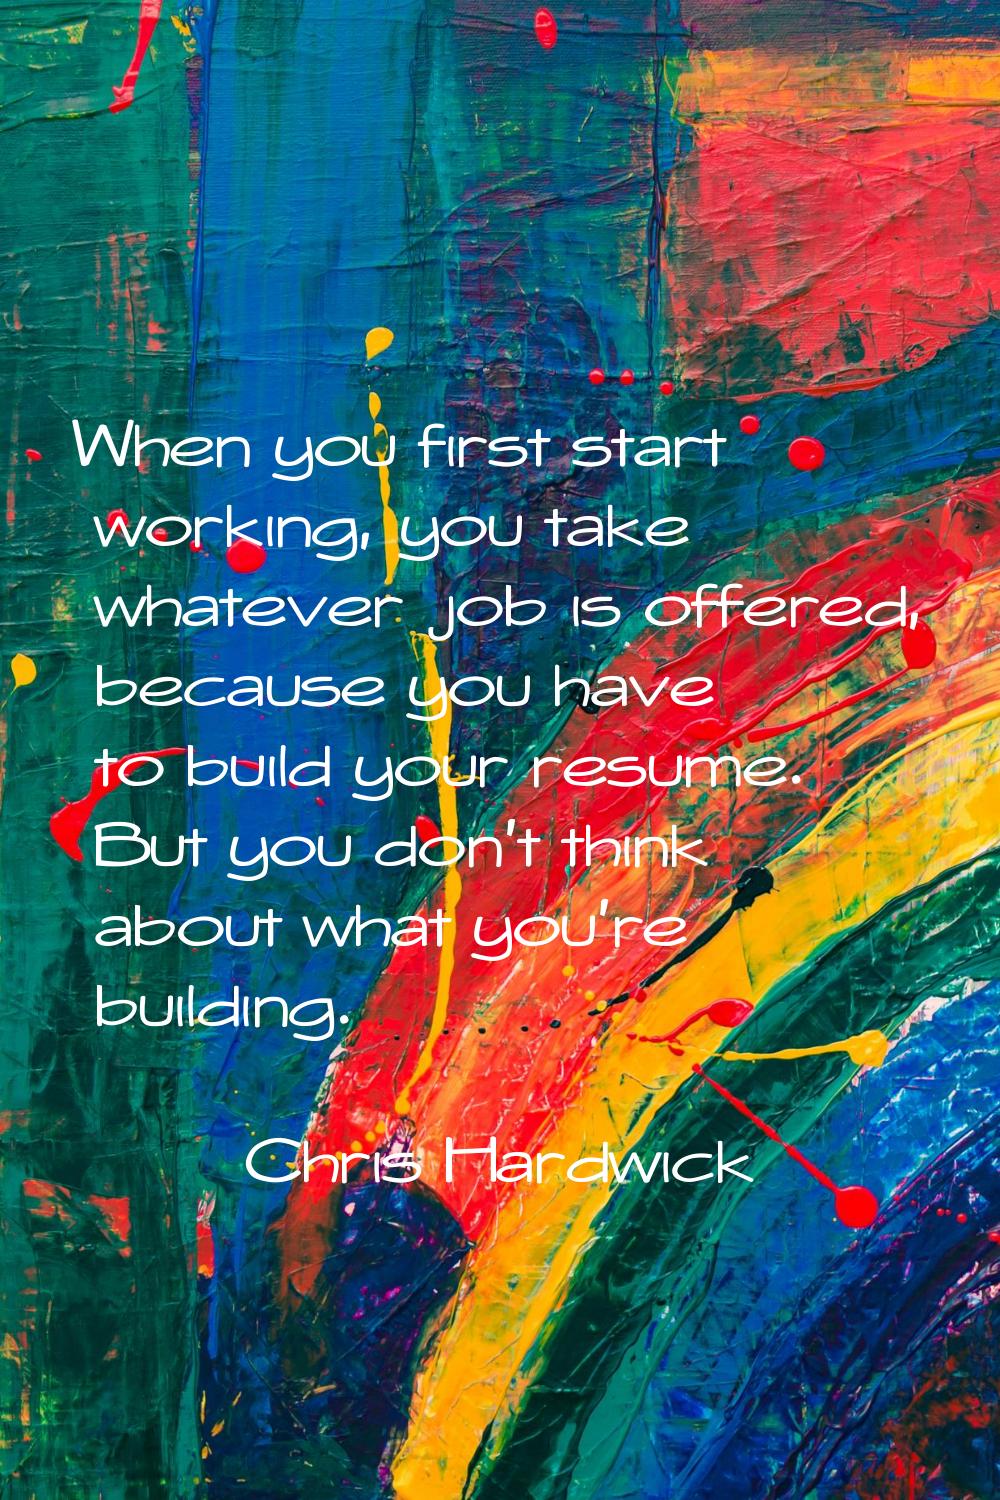 When you first start working, you take whatever job is offered, because you have to build your resu